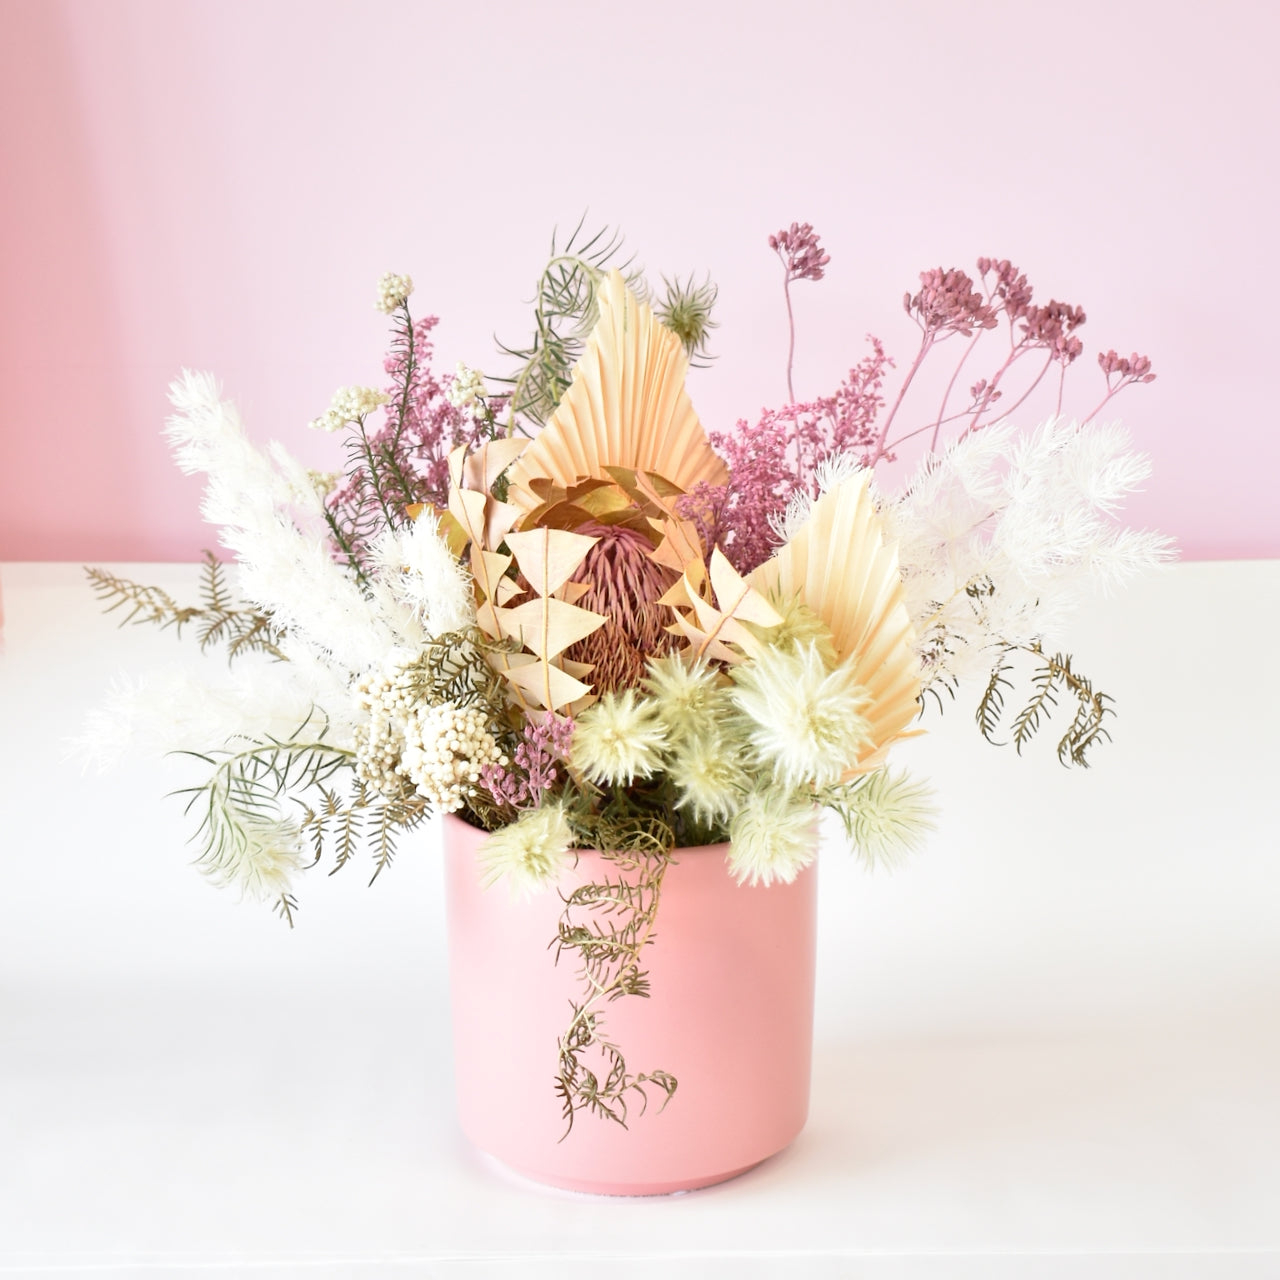 White, peach and pink dried flower bunch in a pink pot. Ferns, banksia, palm